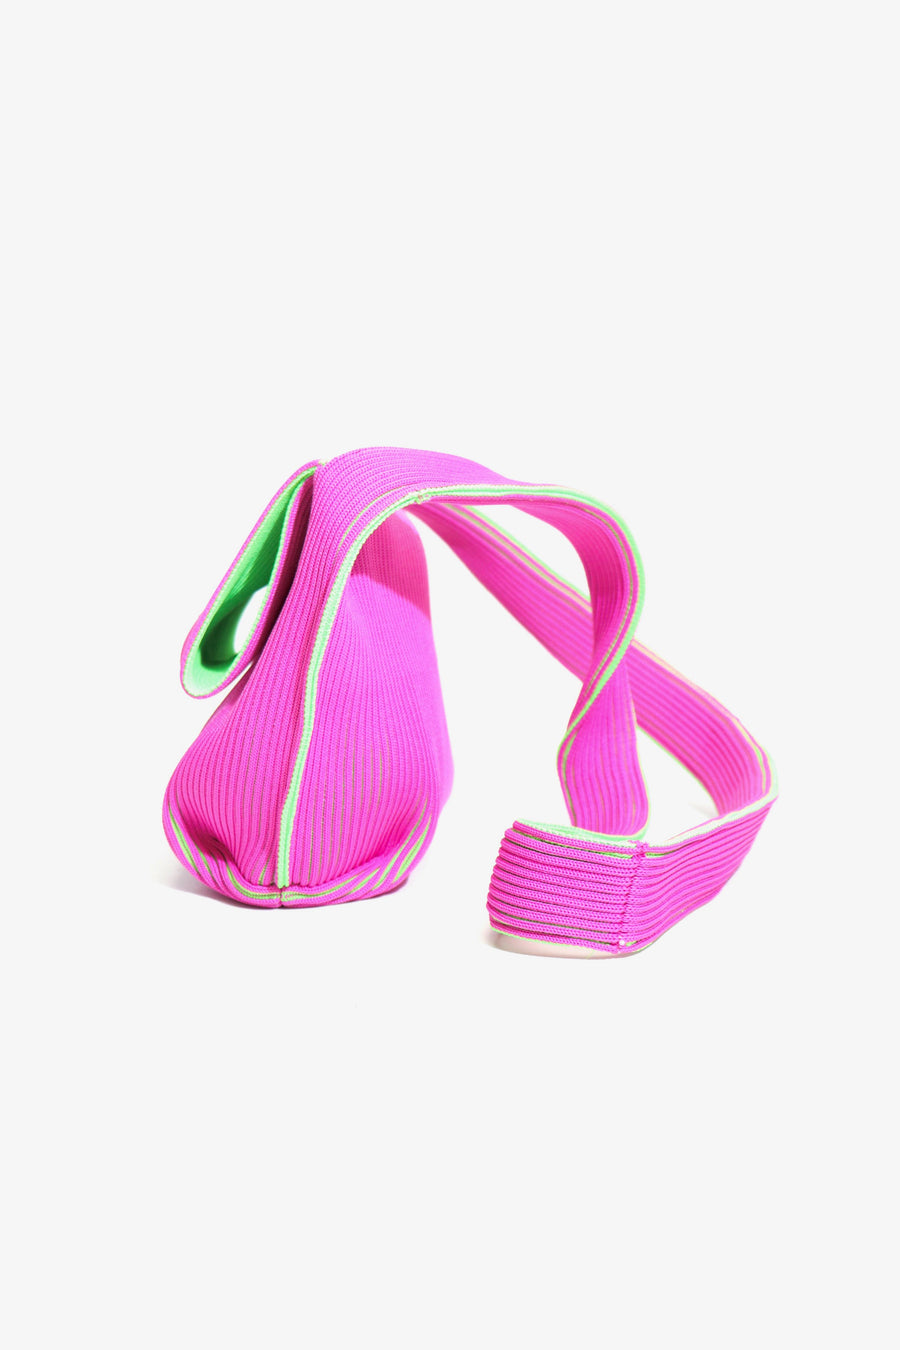 LASTFRAME  TWO TONE TIE BAG(PINK-NEON GREEN)